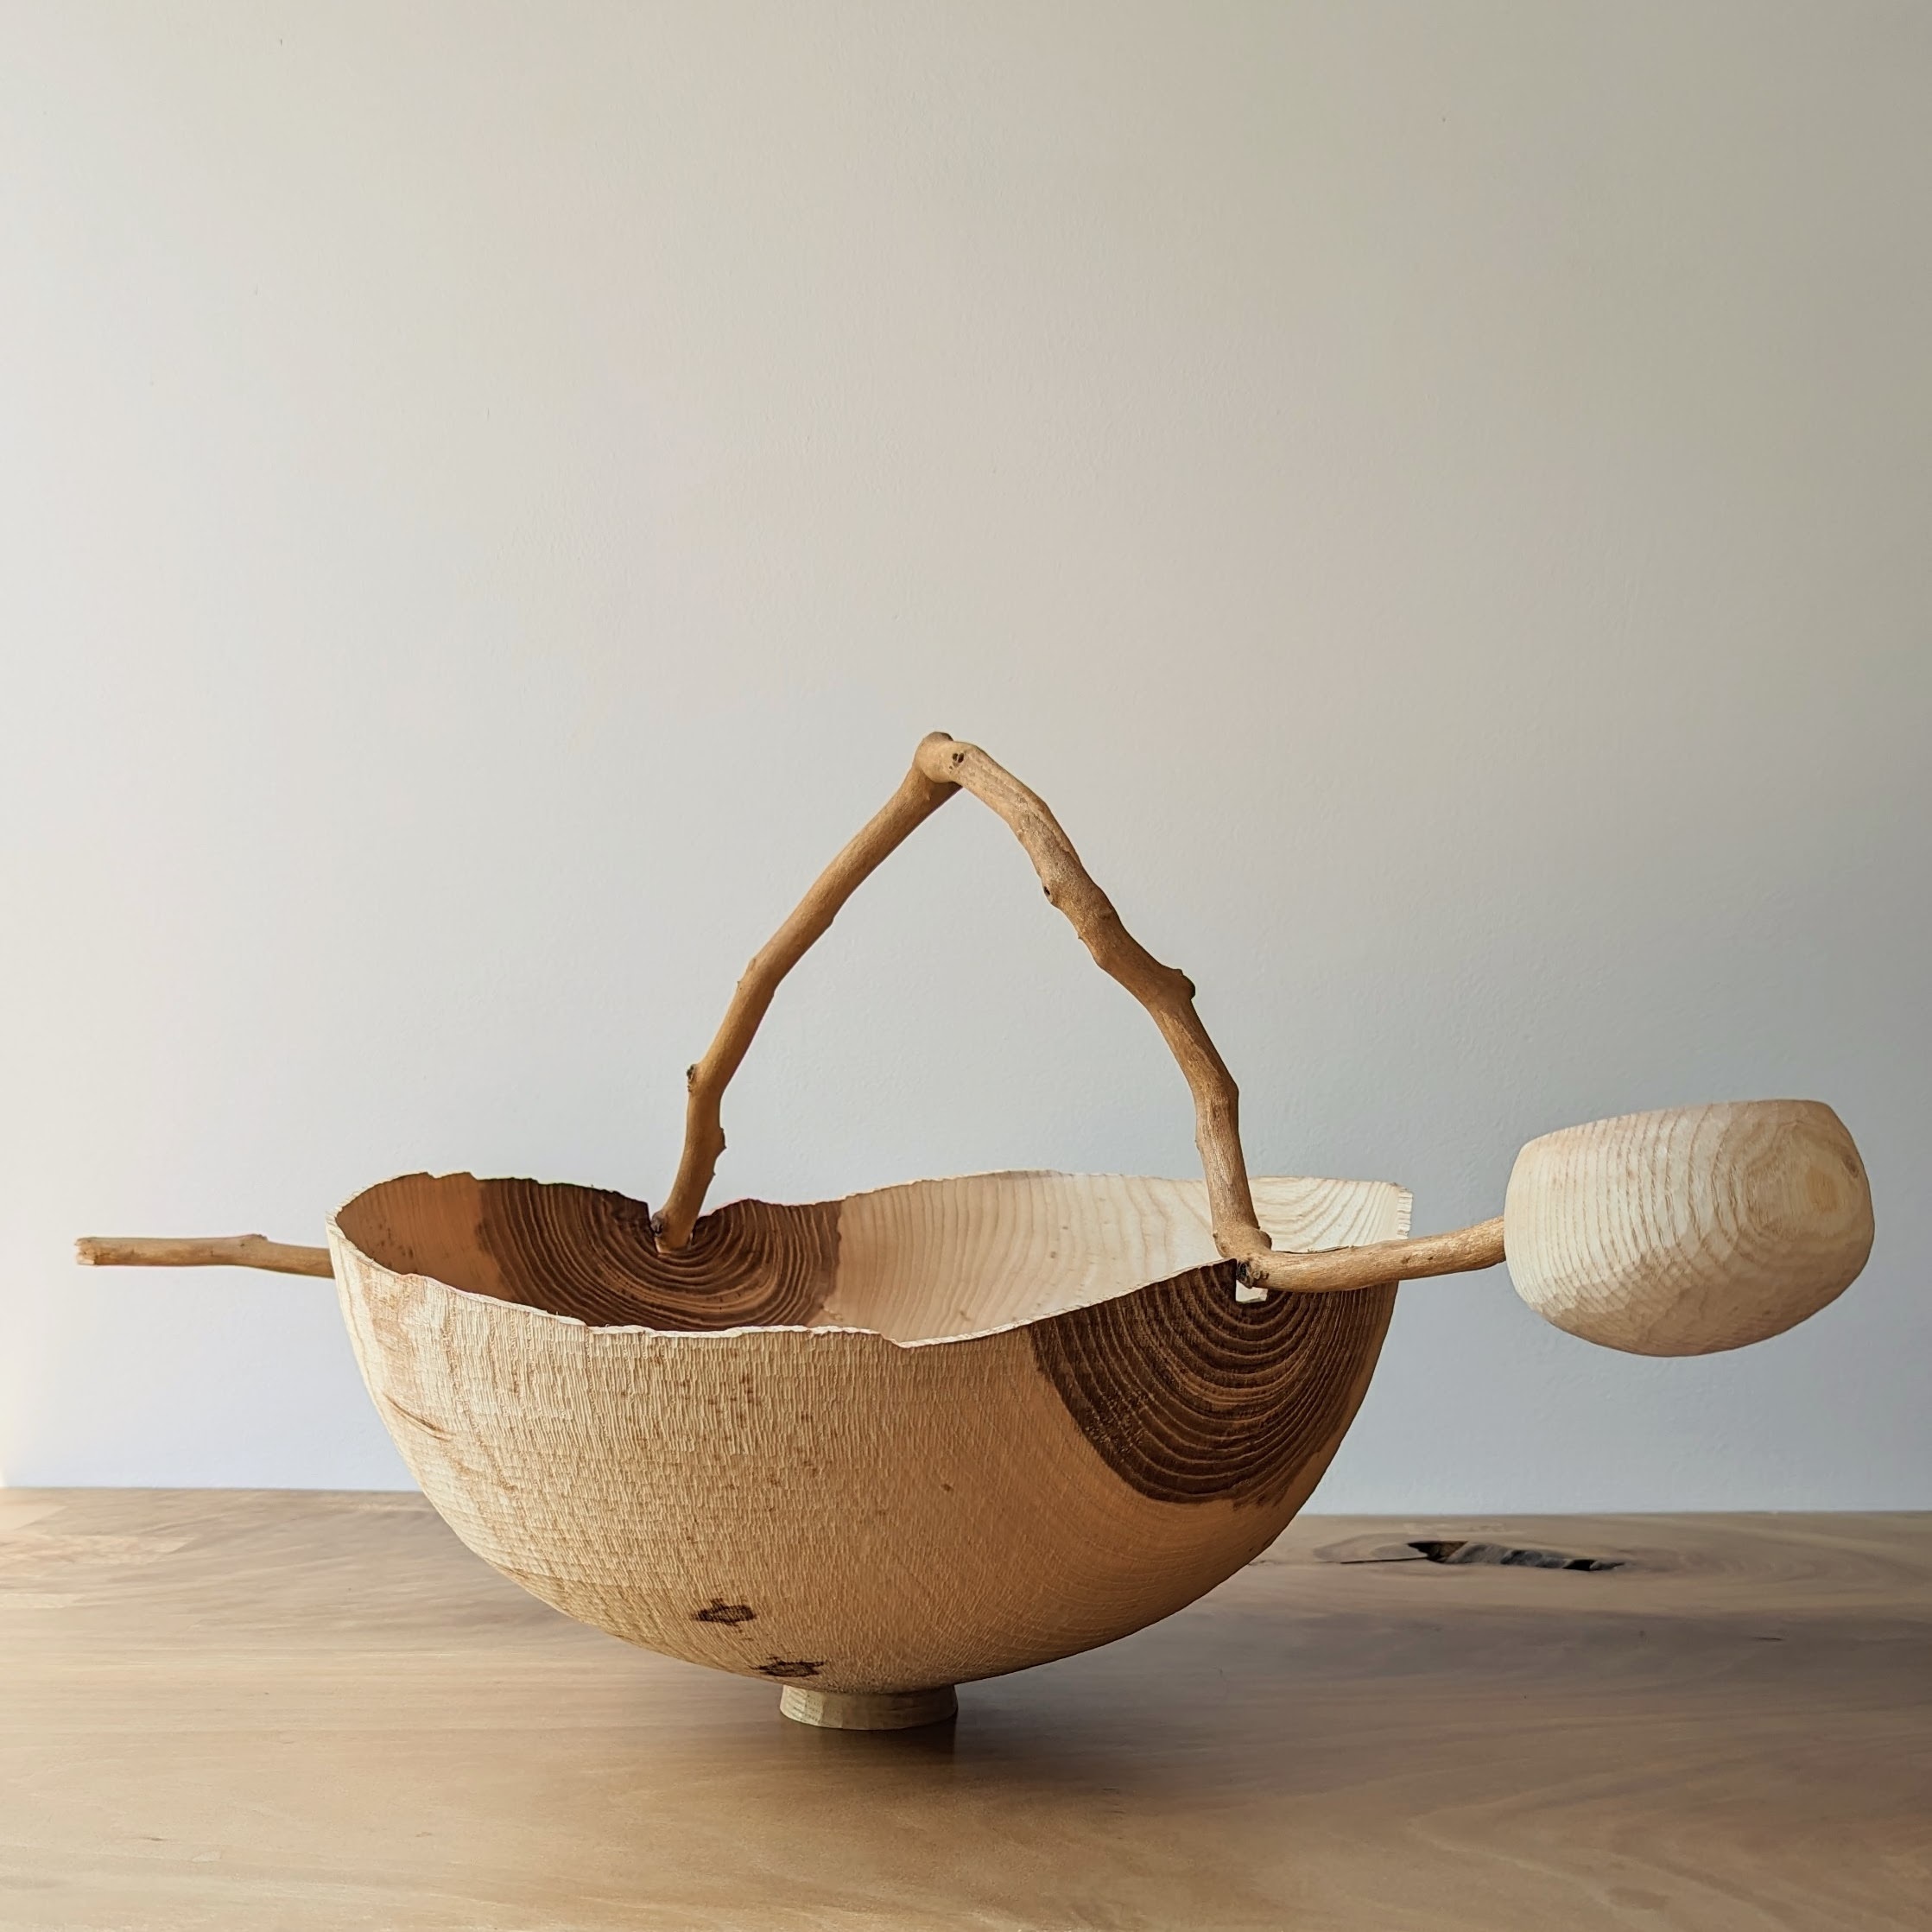 Wooden vessel with a oversized, twig spoon perched on the rim.